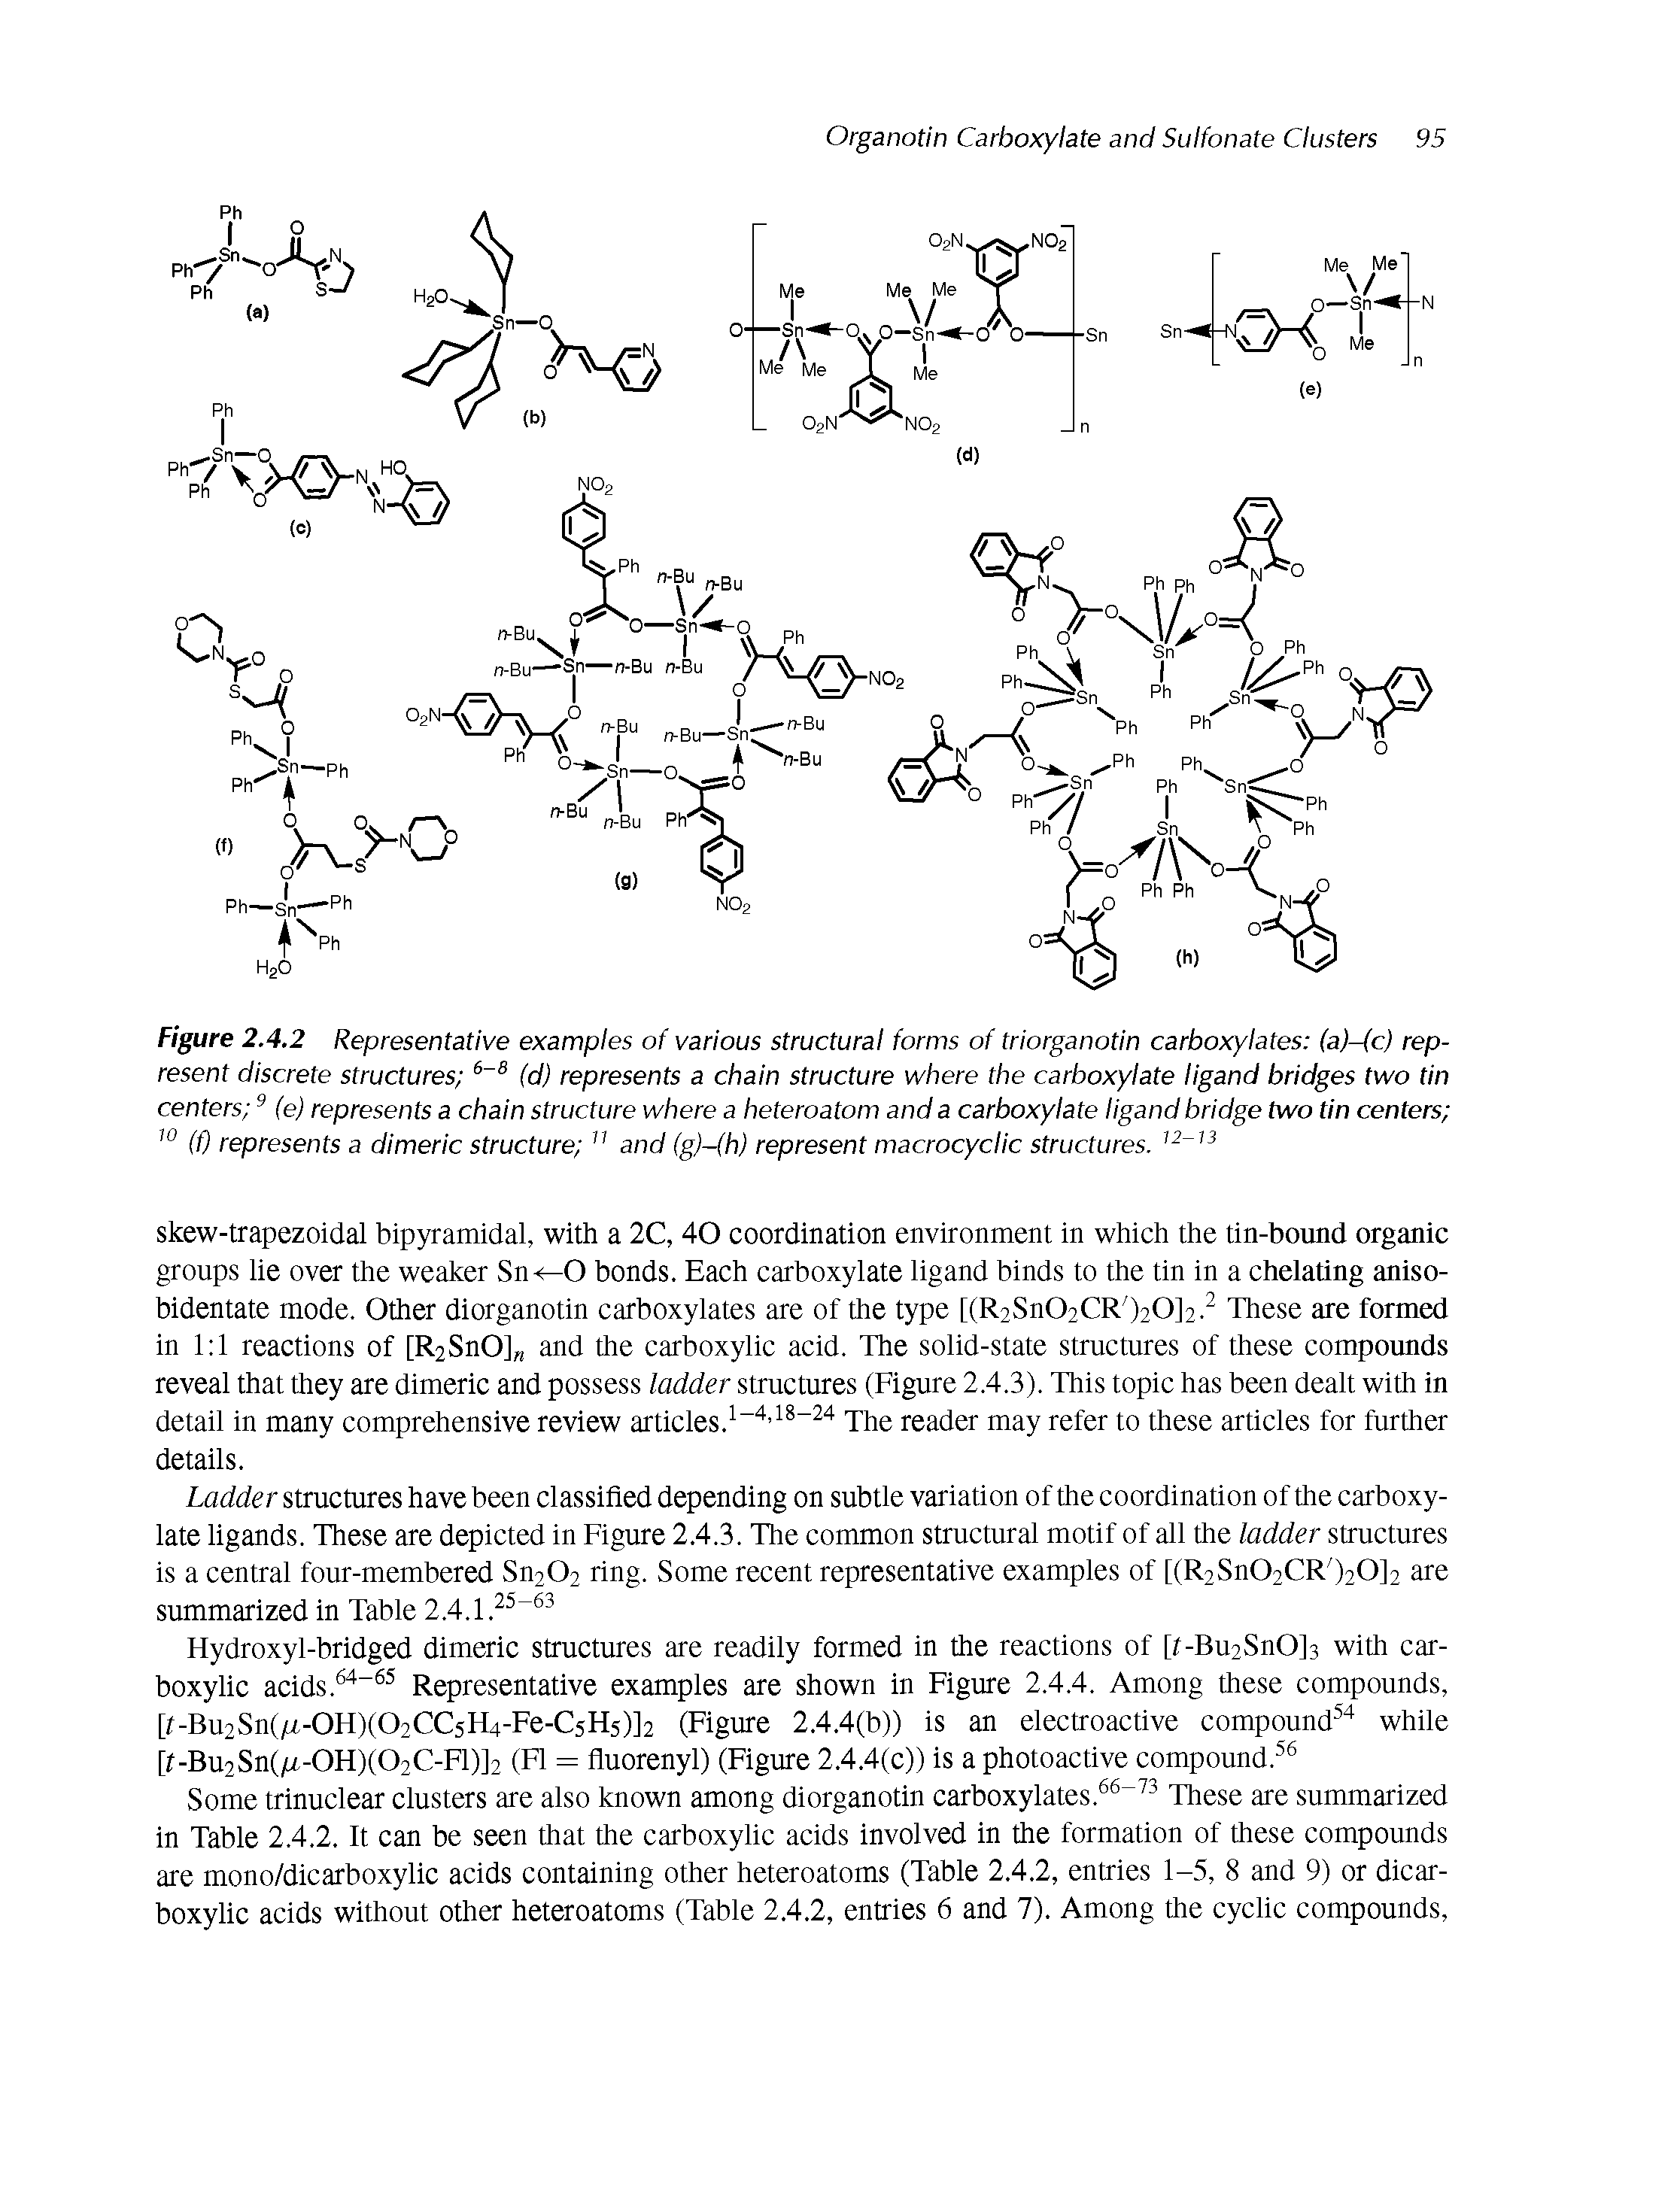 Figure 2.4.2 Representative examples of various structural forms of triorganotin carboxylates (a)-(c) represent discrete structures (d) represents a chain structure where the carboxylate ligand bridges two tin centers (e) represents a chain structure where a heteroatom and a carboxylate ligand bridge two tin centers (f) represents a dimeric structure and (g)-(h) represent macrocyclic structures.